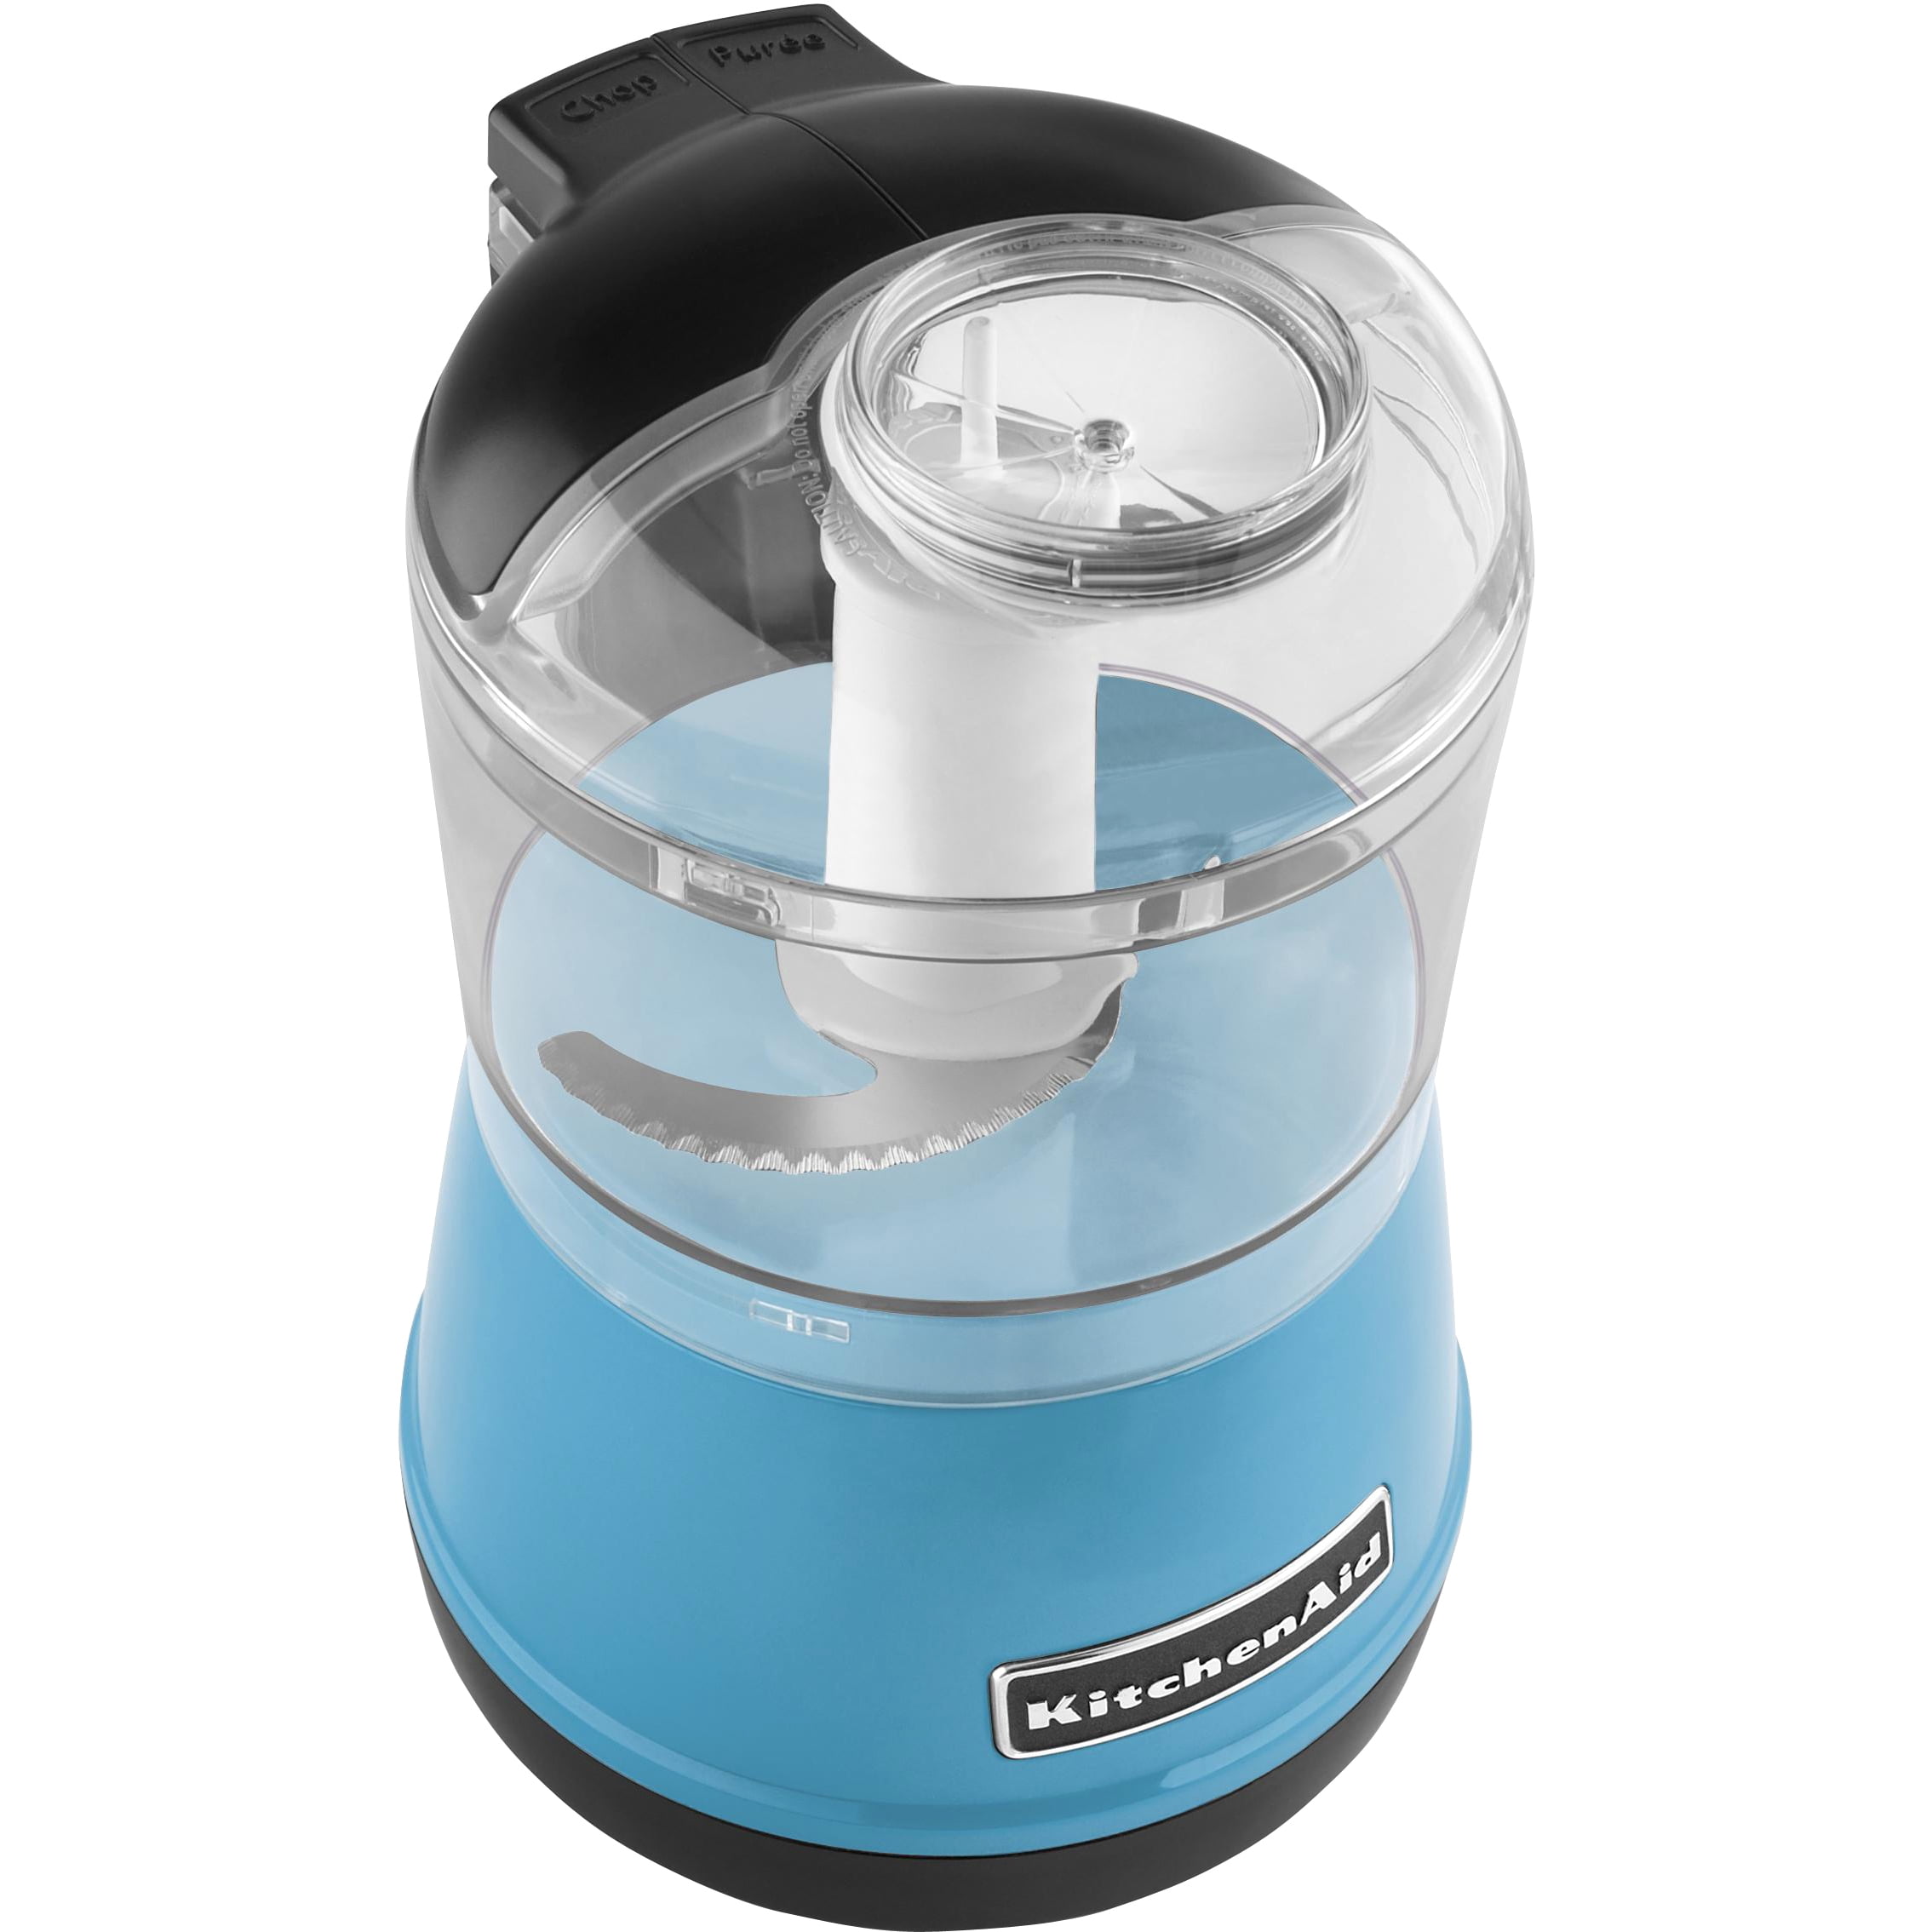 KitchenAid 5-Cup Chopper: How to take the lid on and off 😊  I had a  question about taking the lid on and off for the KitchenAid 5-cup chopper -  here's a